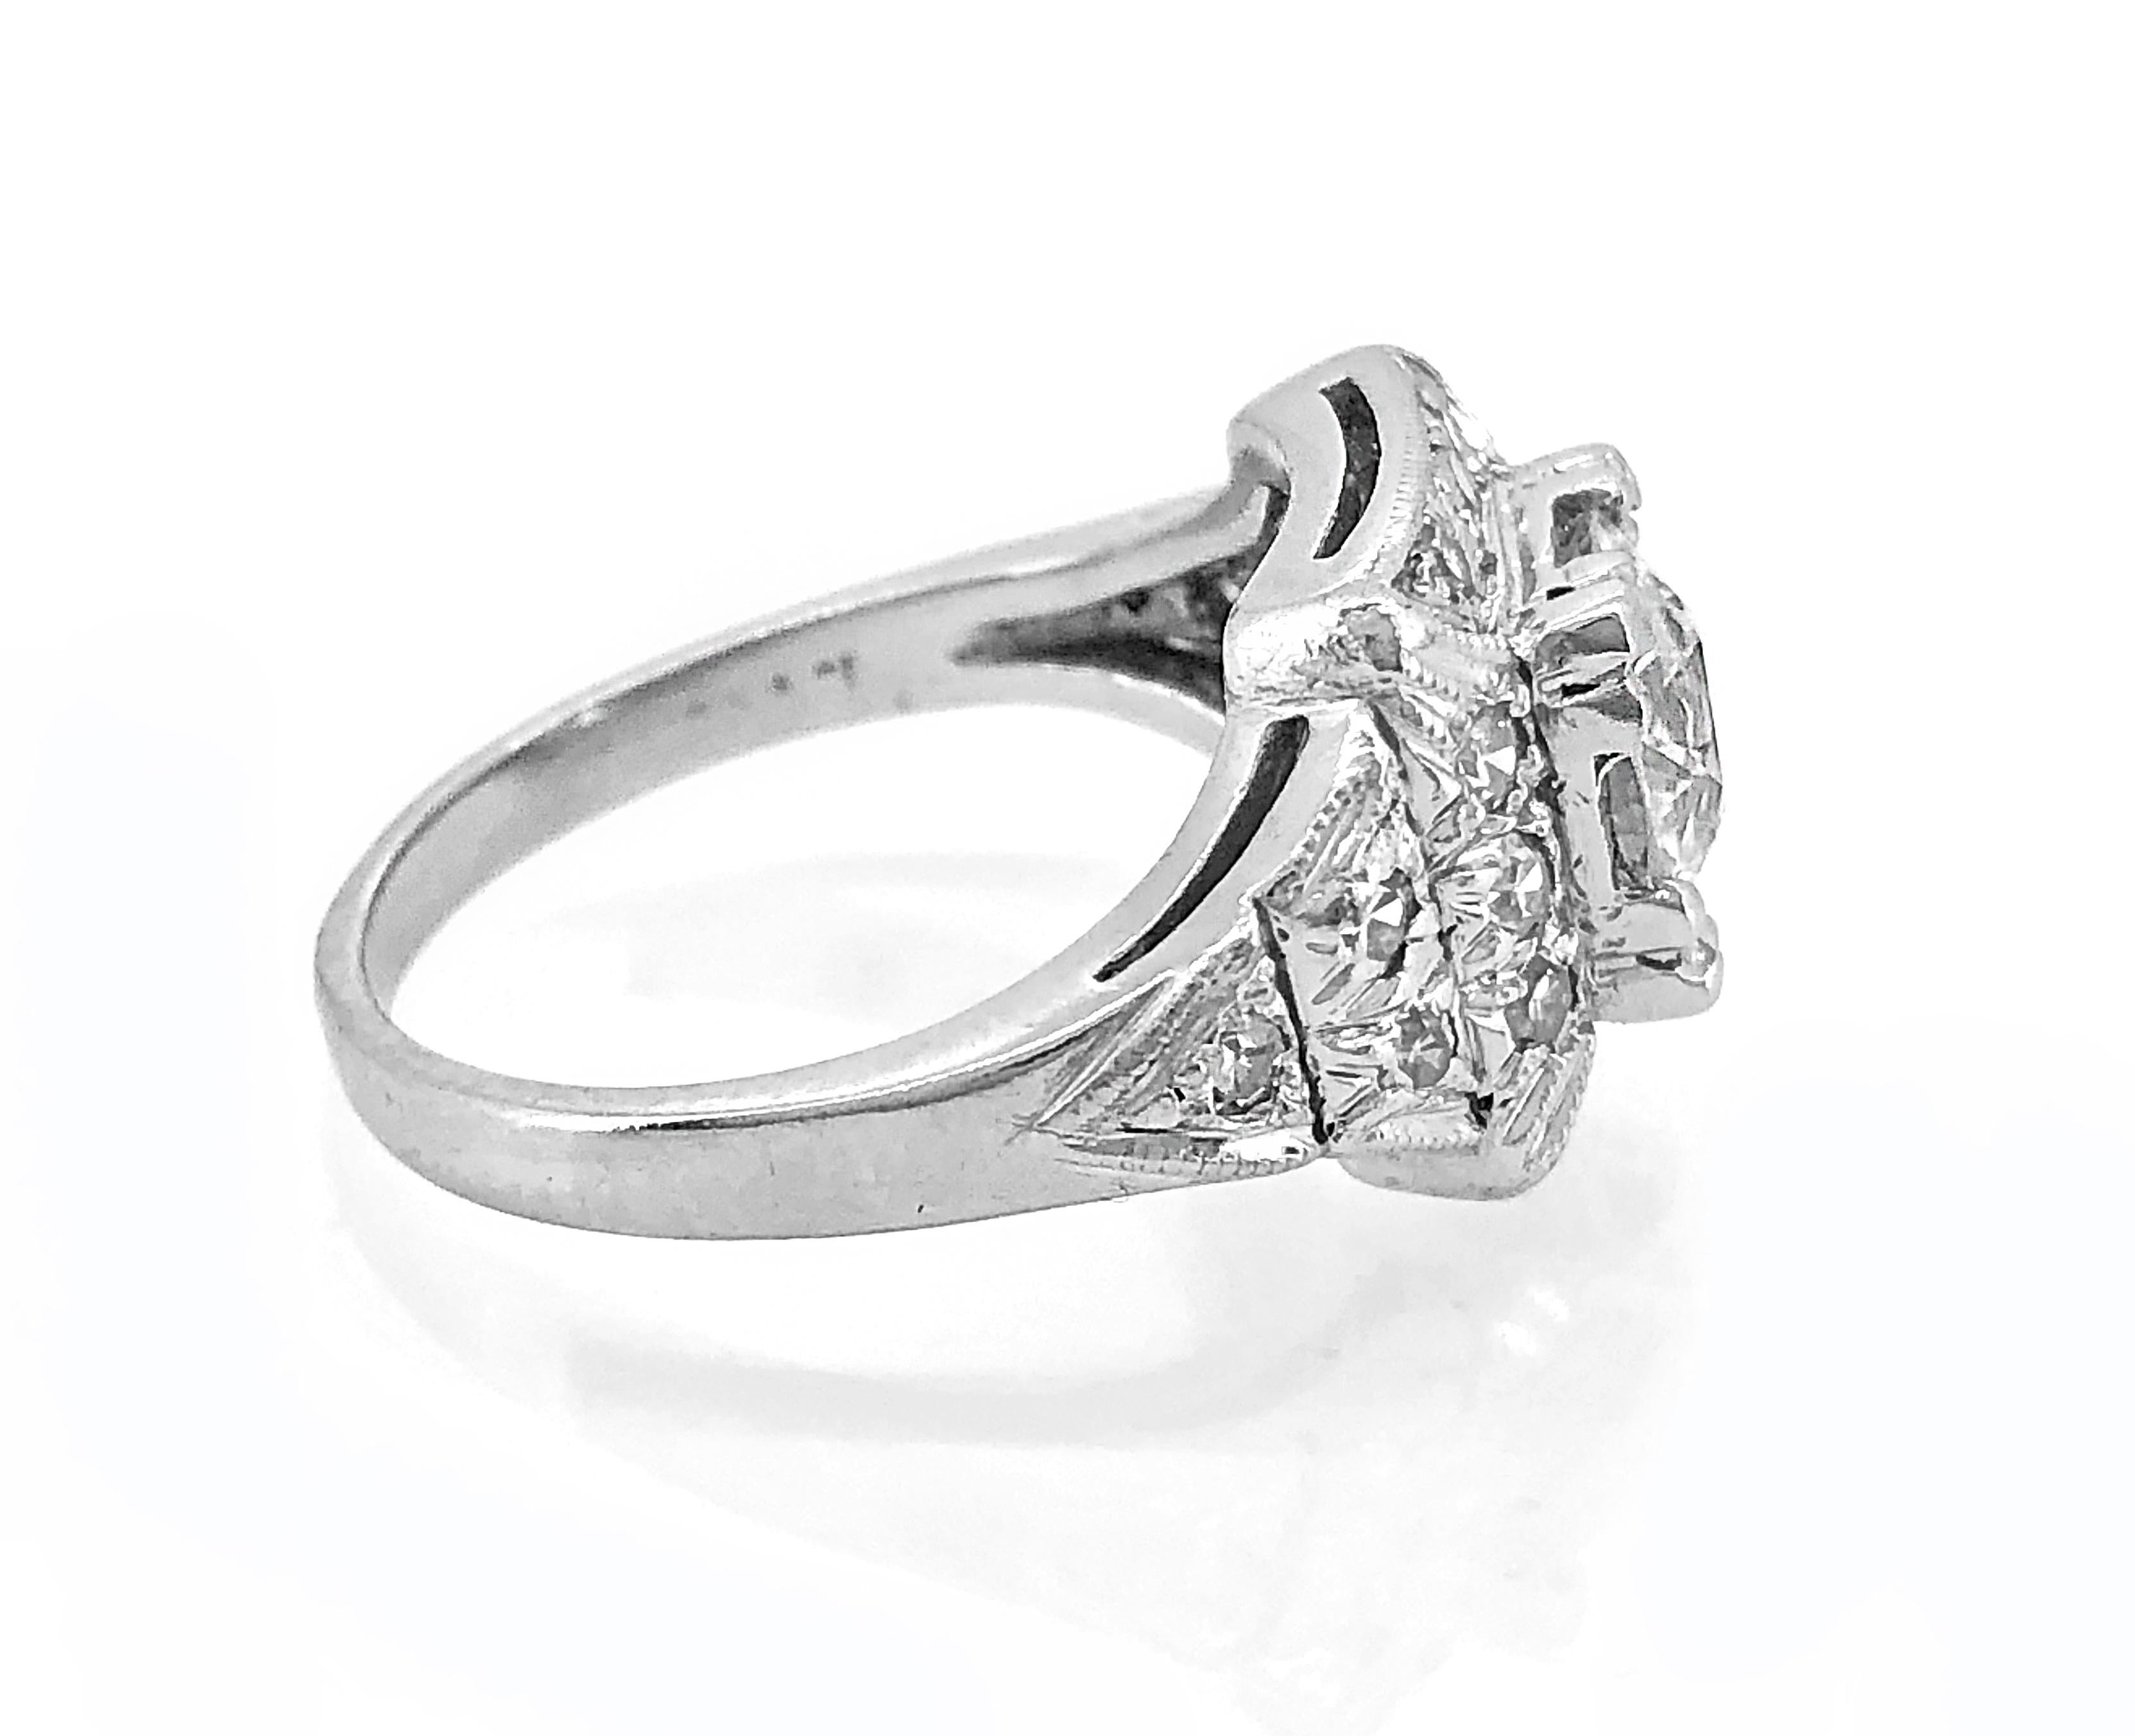 Stunning 1.23ct. Diamond & Platinum Art Deco Engagement Ring In Excellent Condition For Sale In Tampa, FL